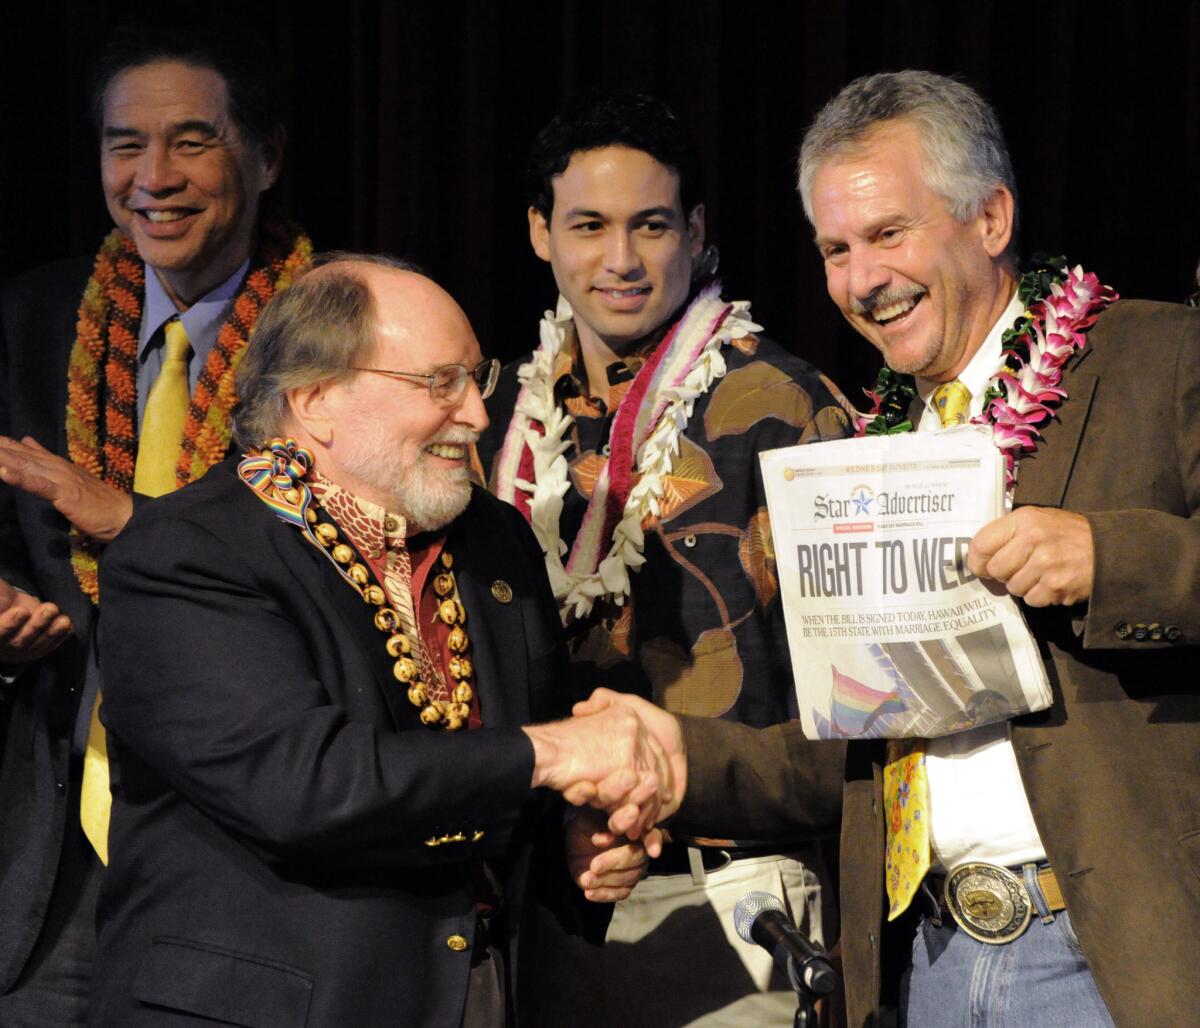 Gov. Neil Abercrombie, left, and former Sen. Avery Chumley hold a copy of the Star Advertiser after Abercrombie signed the bill legalizing gay marriage in Hawaii on Nov. 13, becoming the 15th state to legalize same-sex marriage.